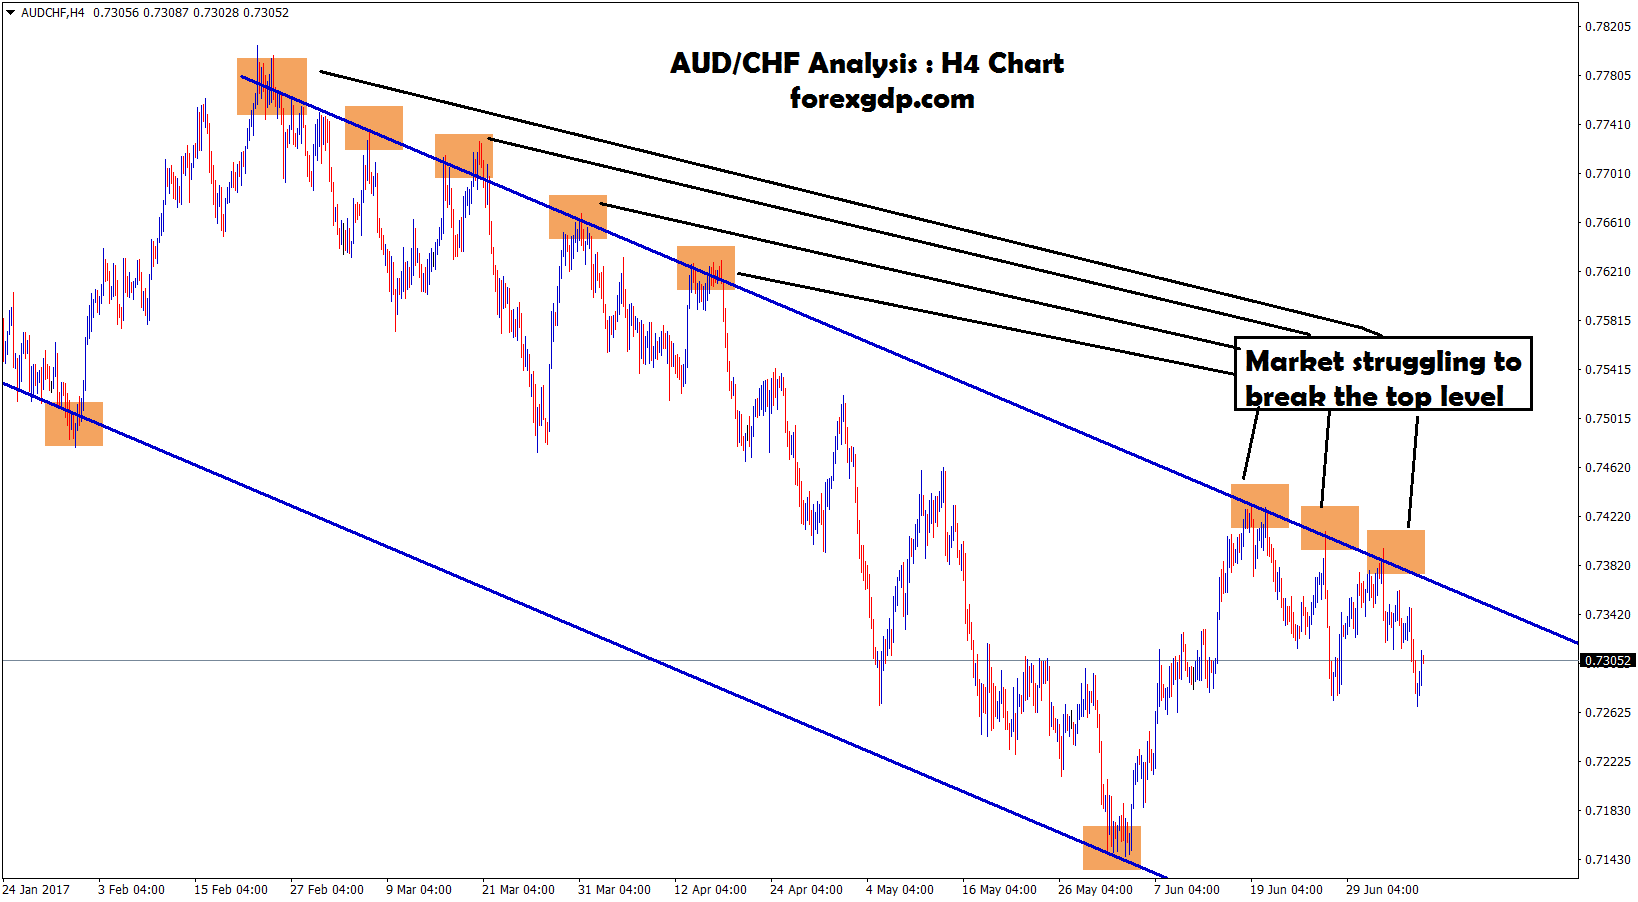 Forex market struggling to break the top resistance level on AUD CHF